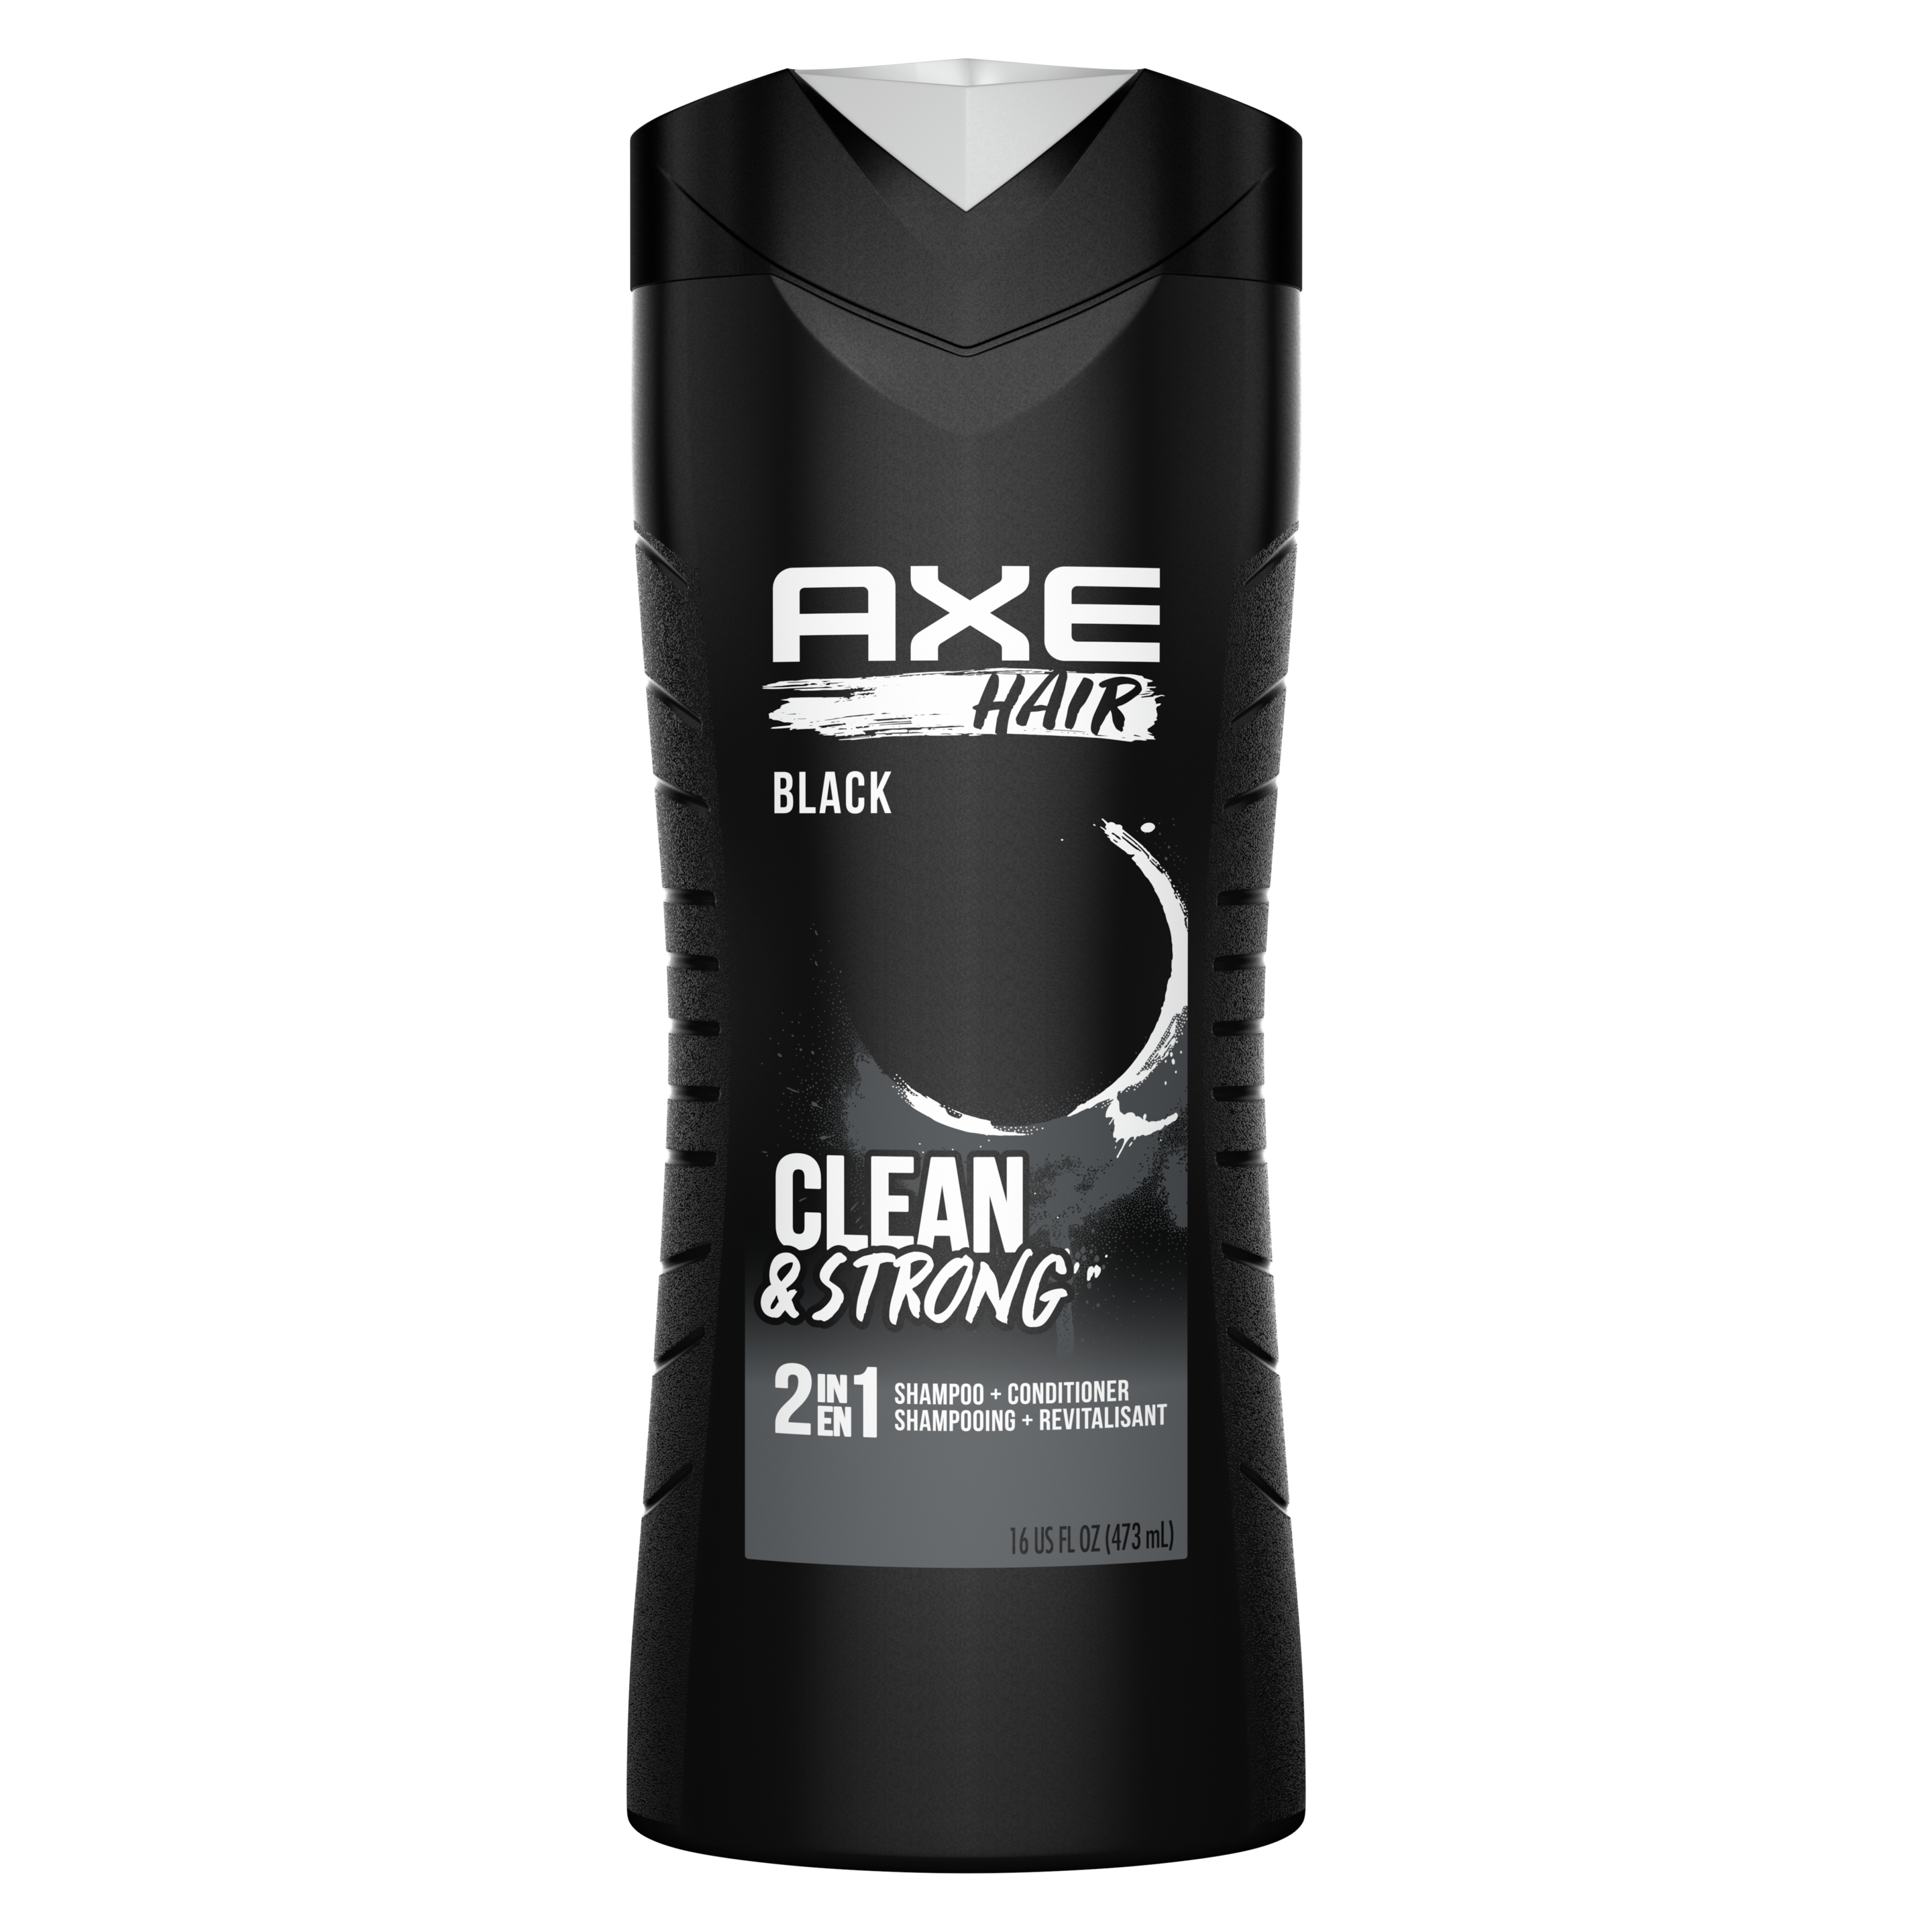 AXE Hair Black 2-in-1 Shampoo and Conditioner